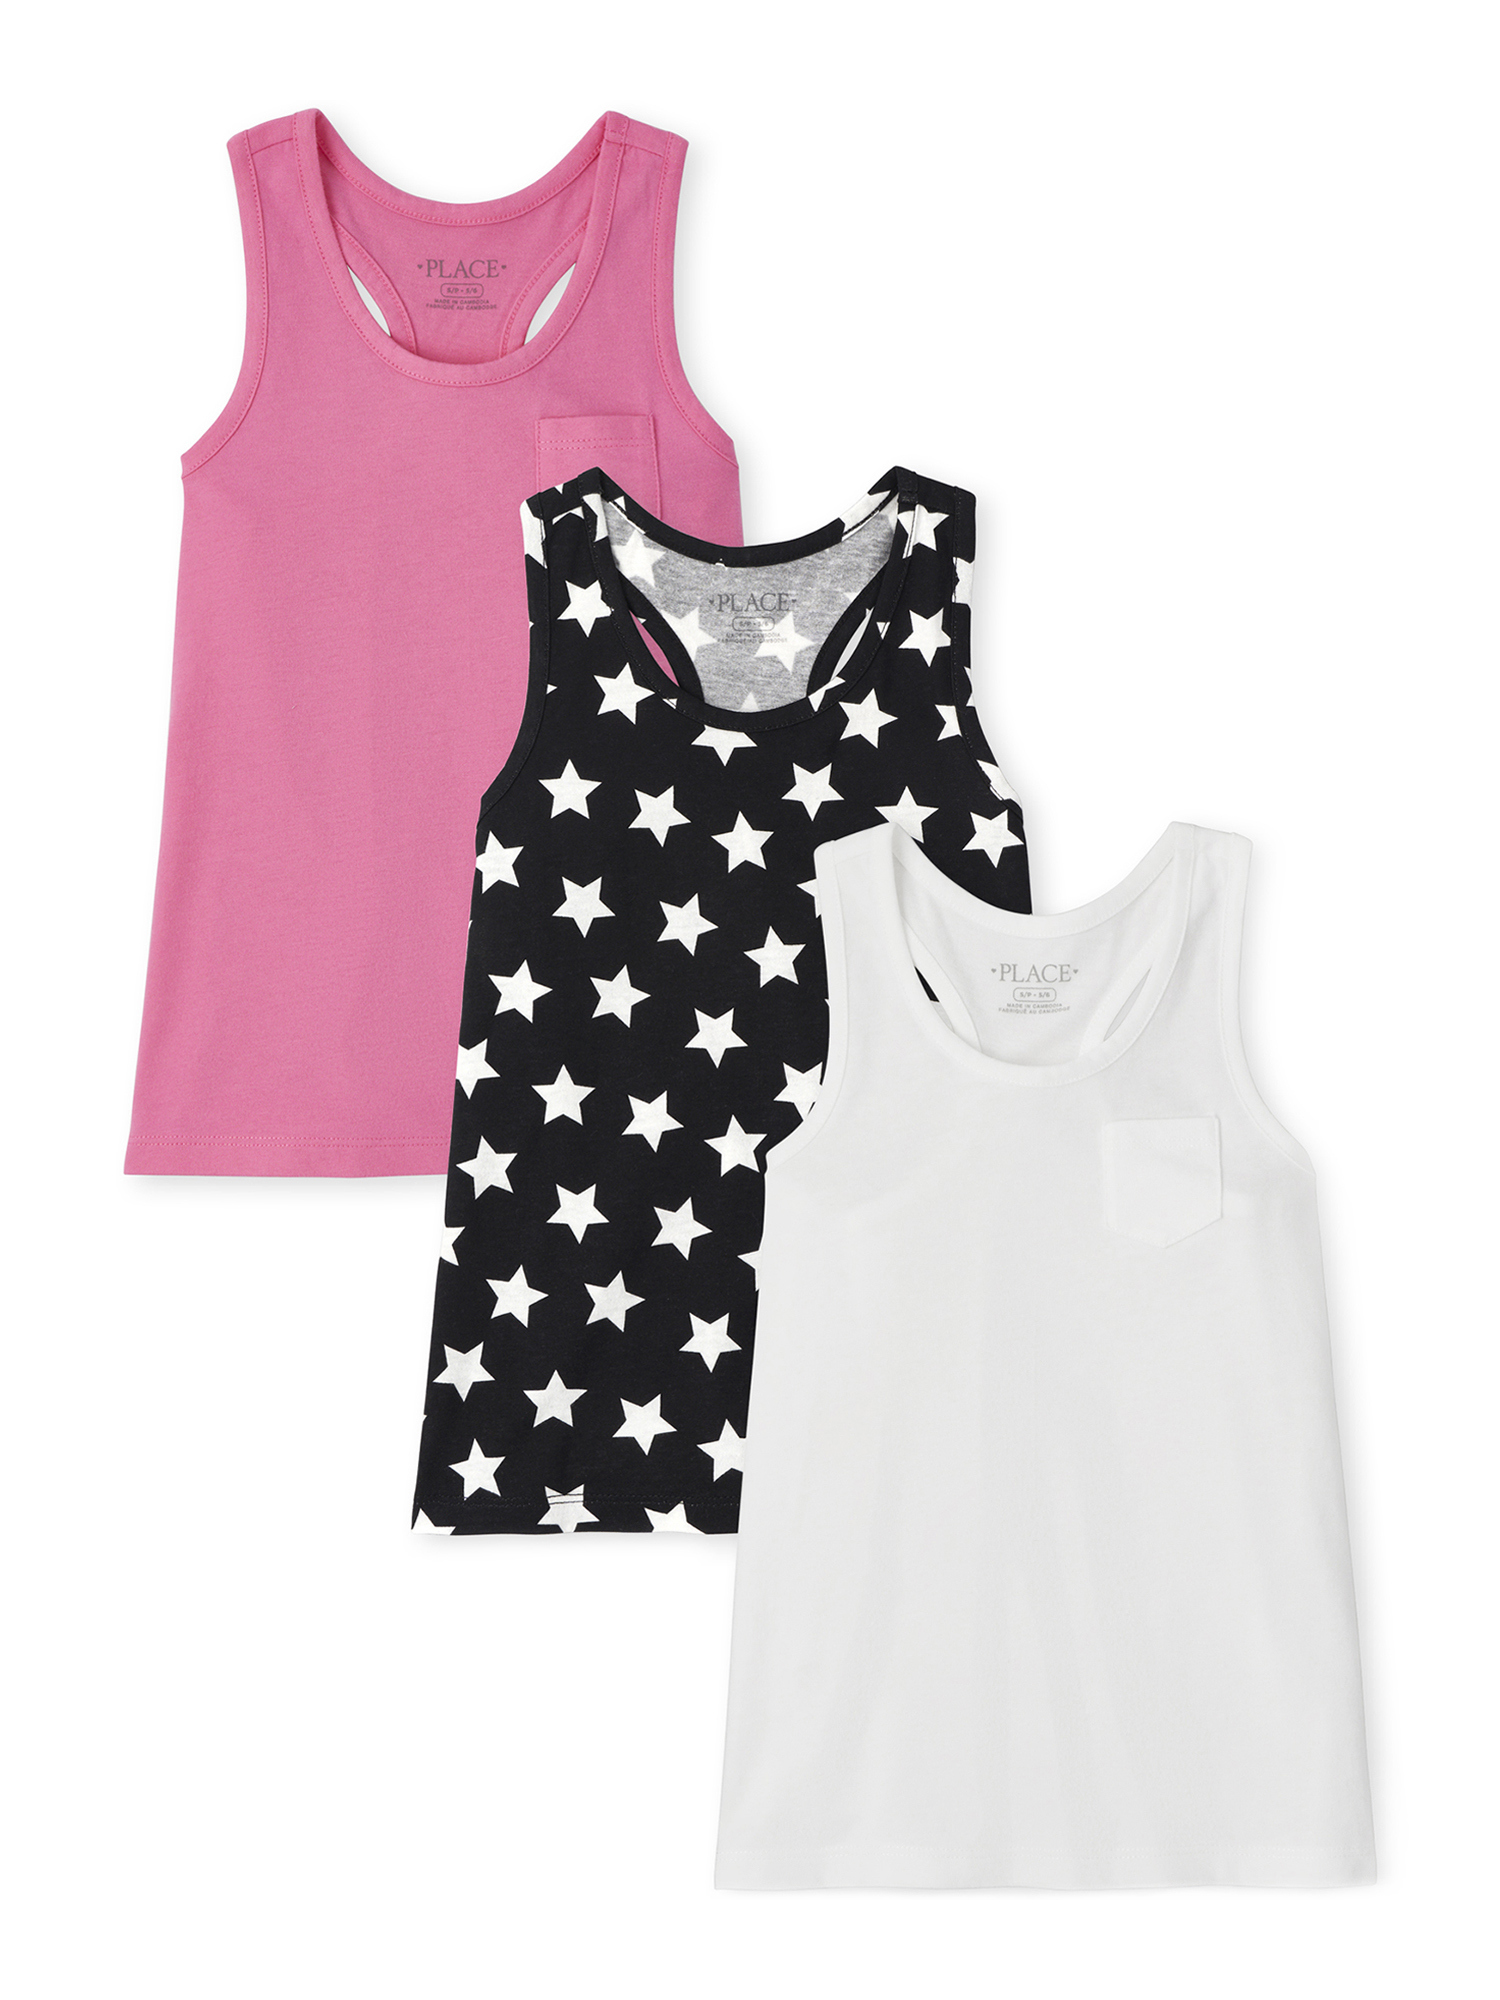 The Children's Place Girls Racerback Tank Tops, 3-Pack, Sizes 5-16 - image 1 of 1